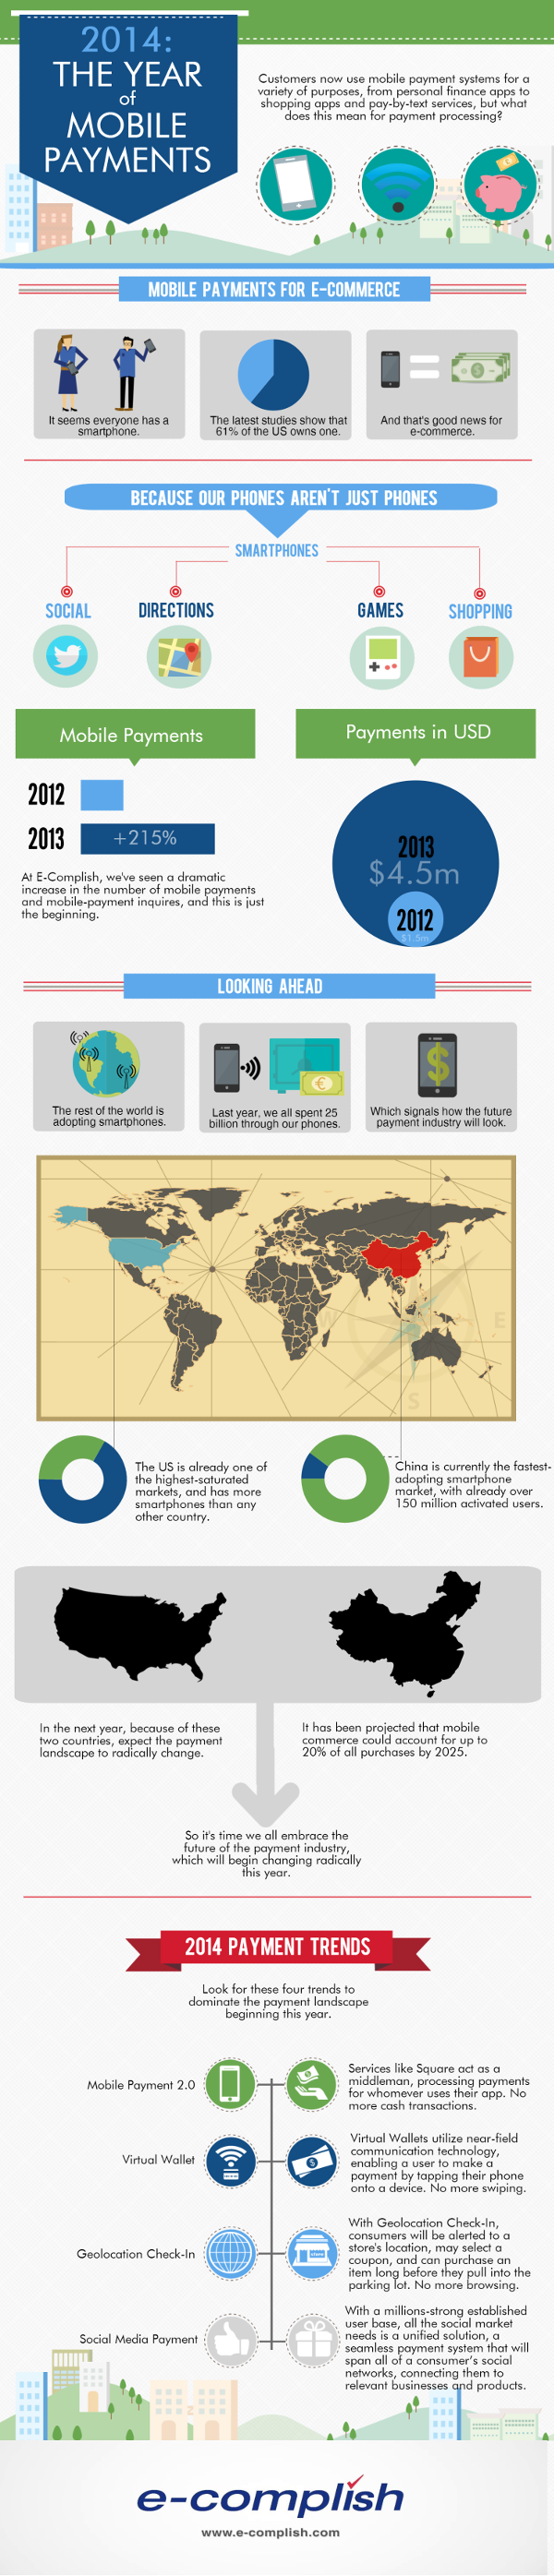 Trends in Mobile Payment